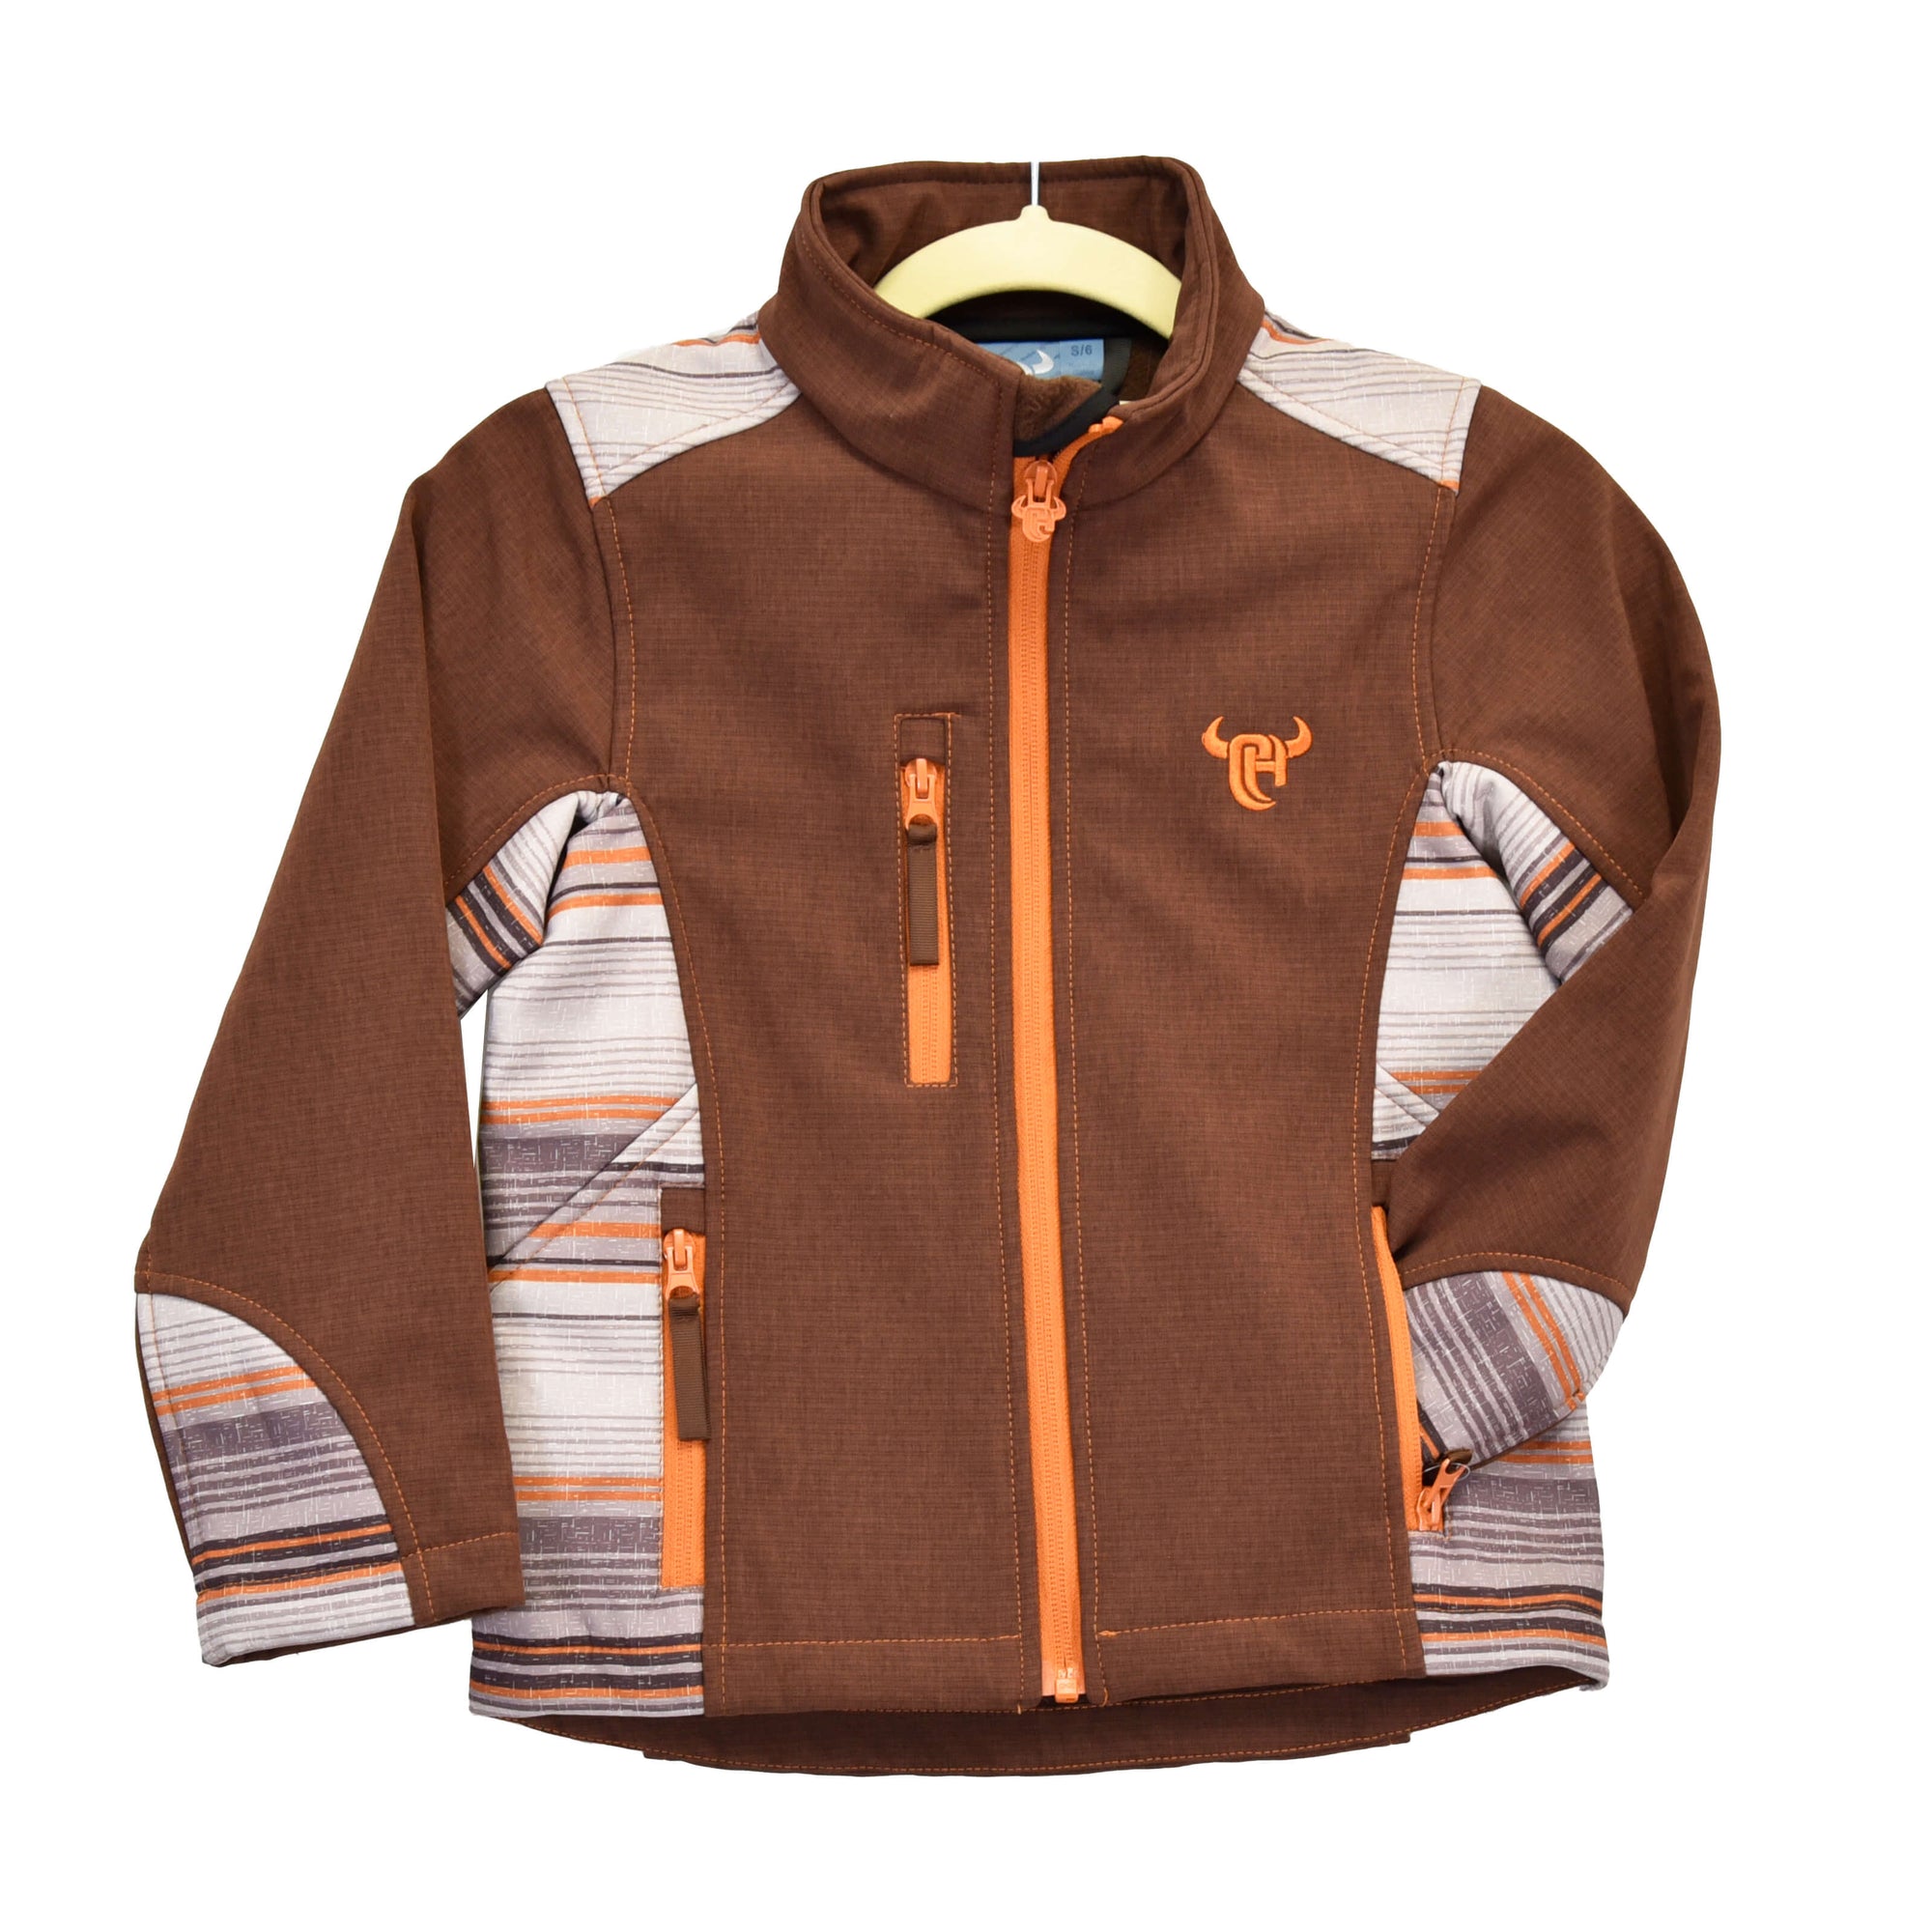 Youth Boy's Reversed Brown Desert Serape Poly Shell Jacket with Serape in Orange,Dark Brown and Grey Stripes. from Cowboy Hardware